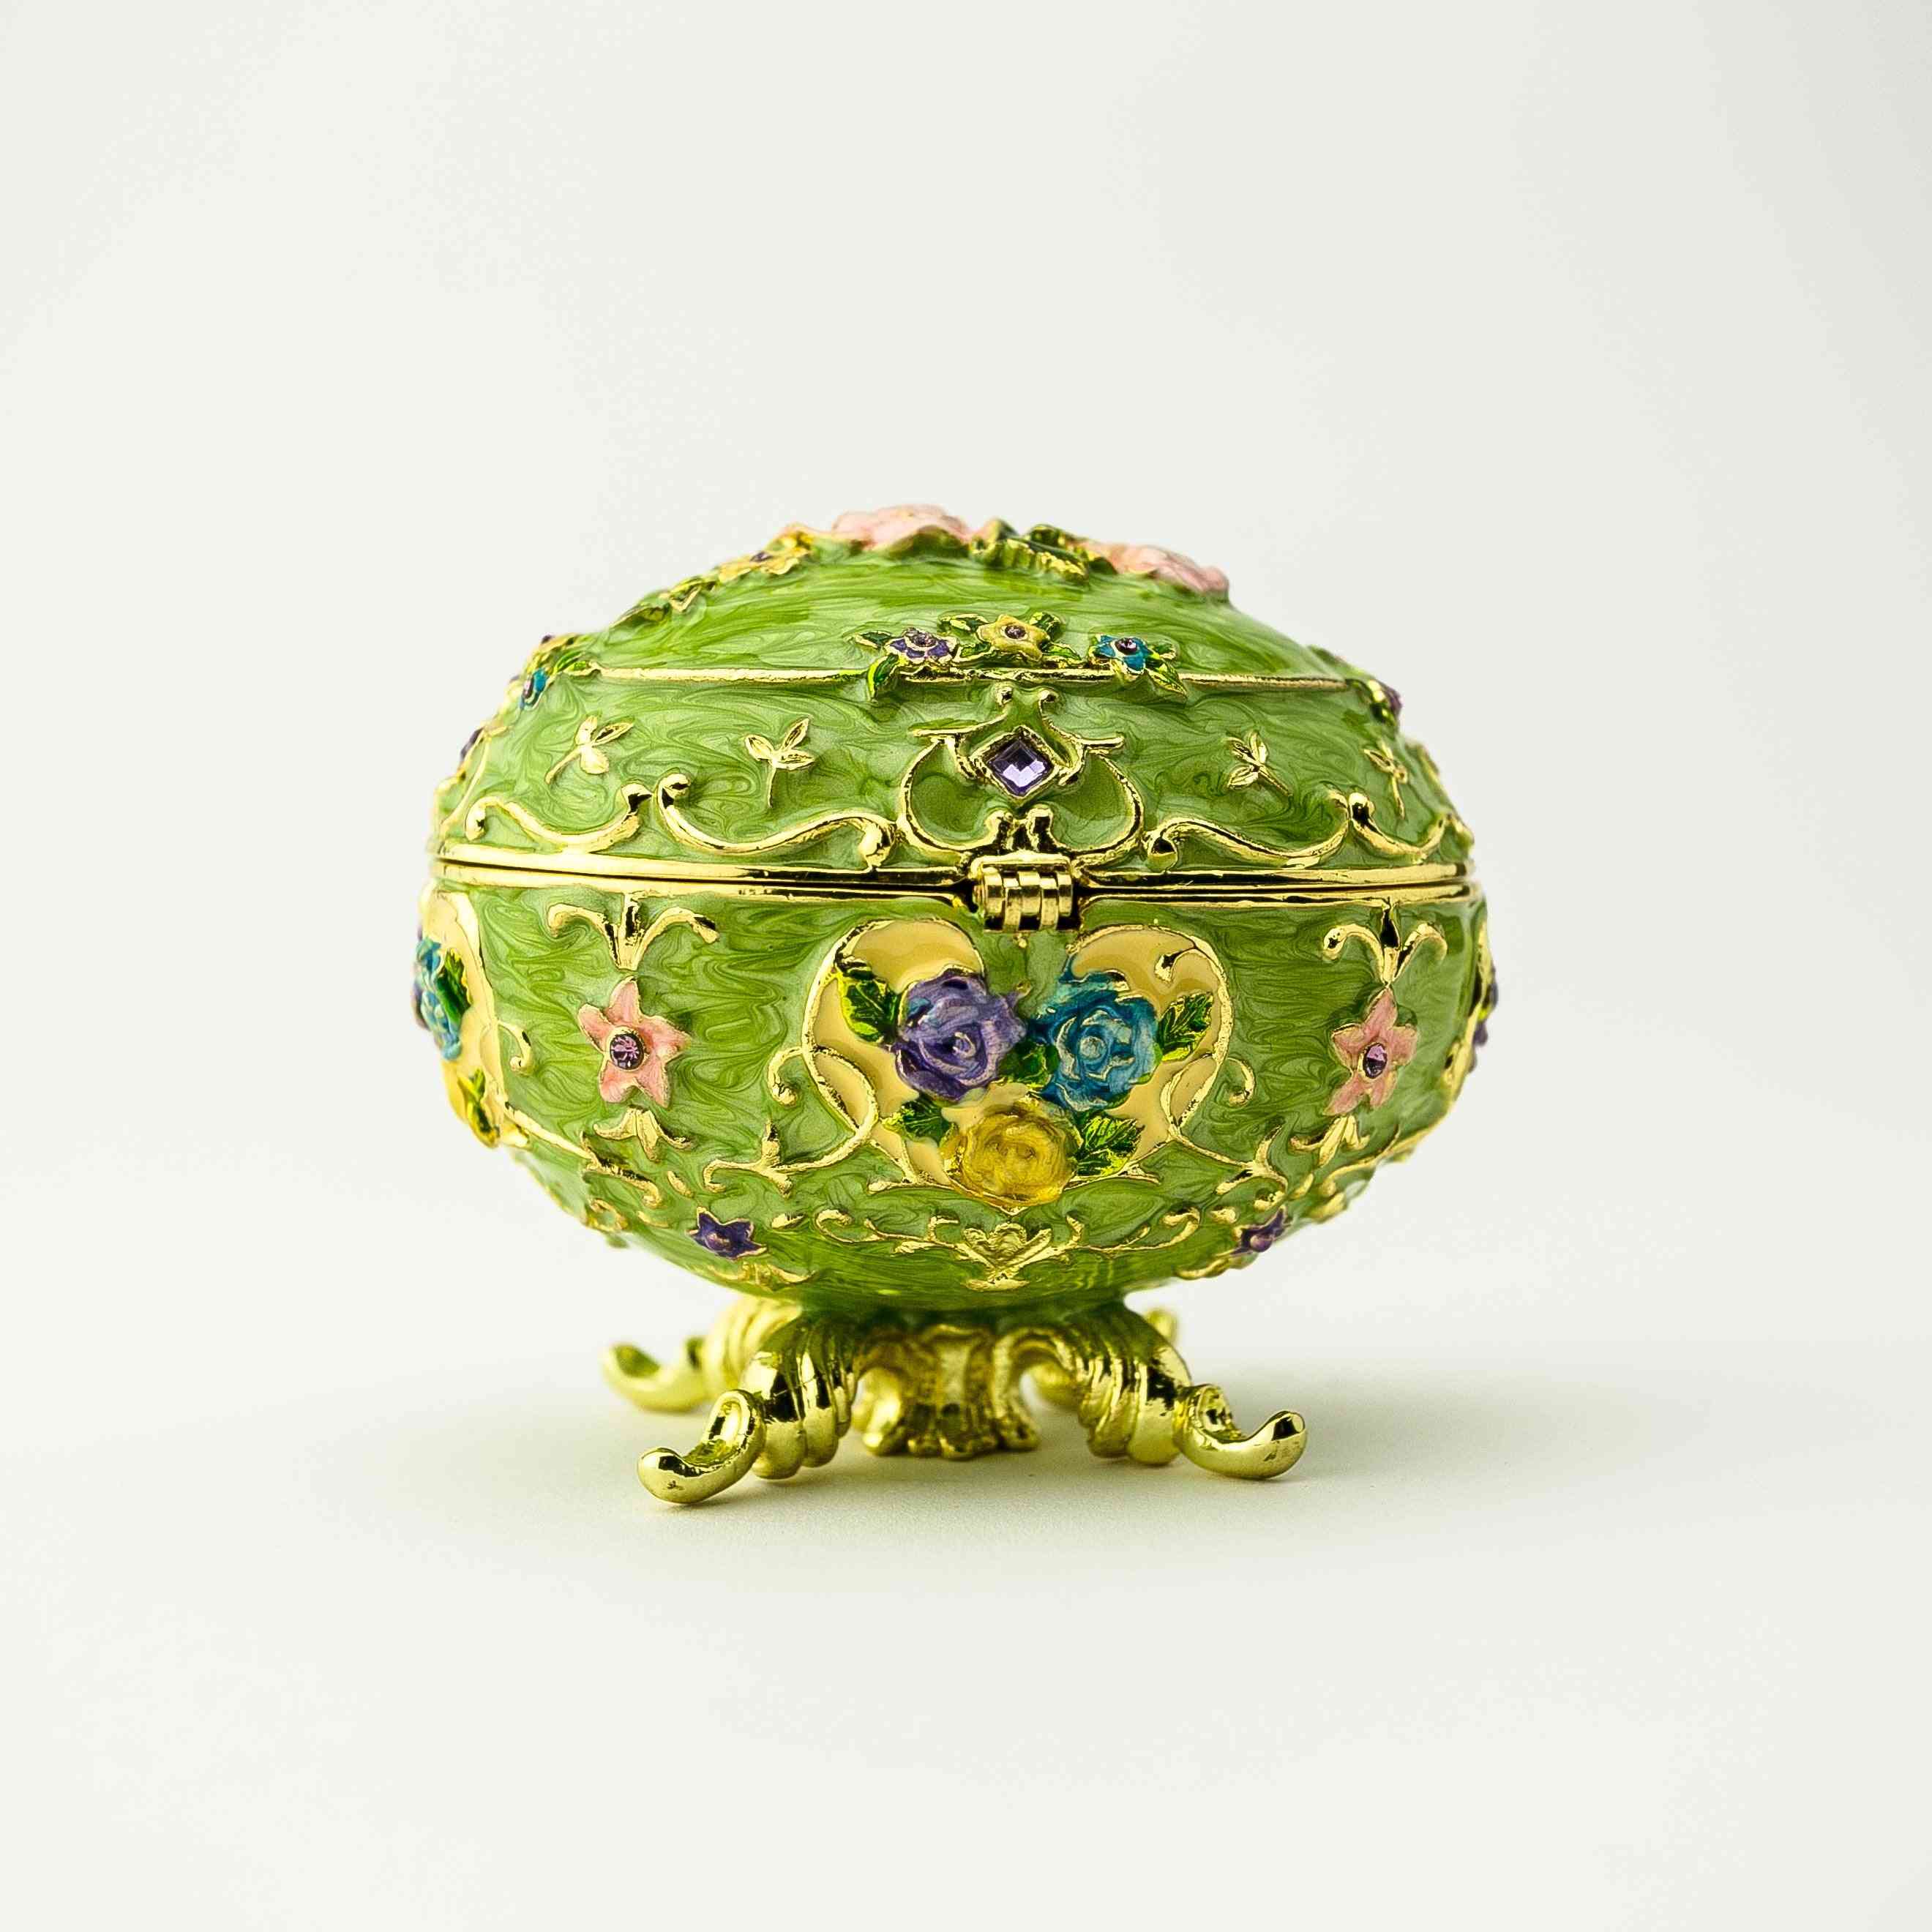 Faberge Egg With Flowers- Trinket Box